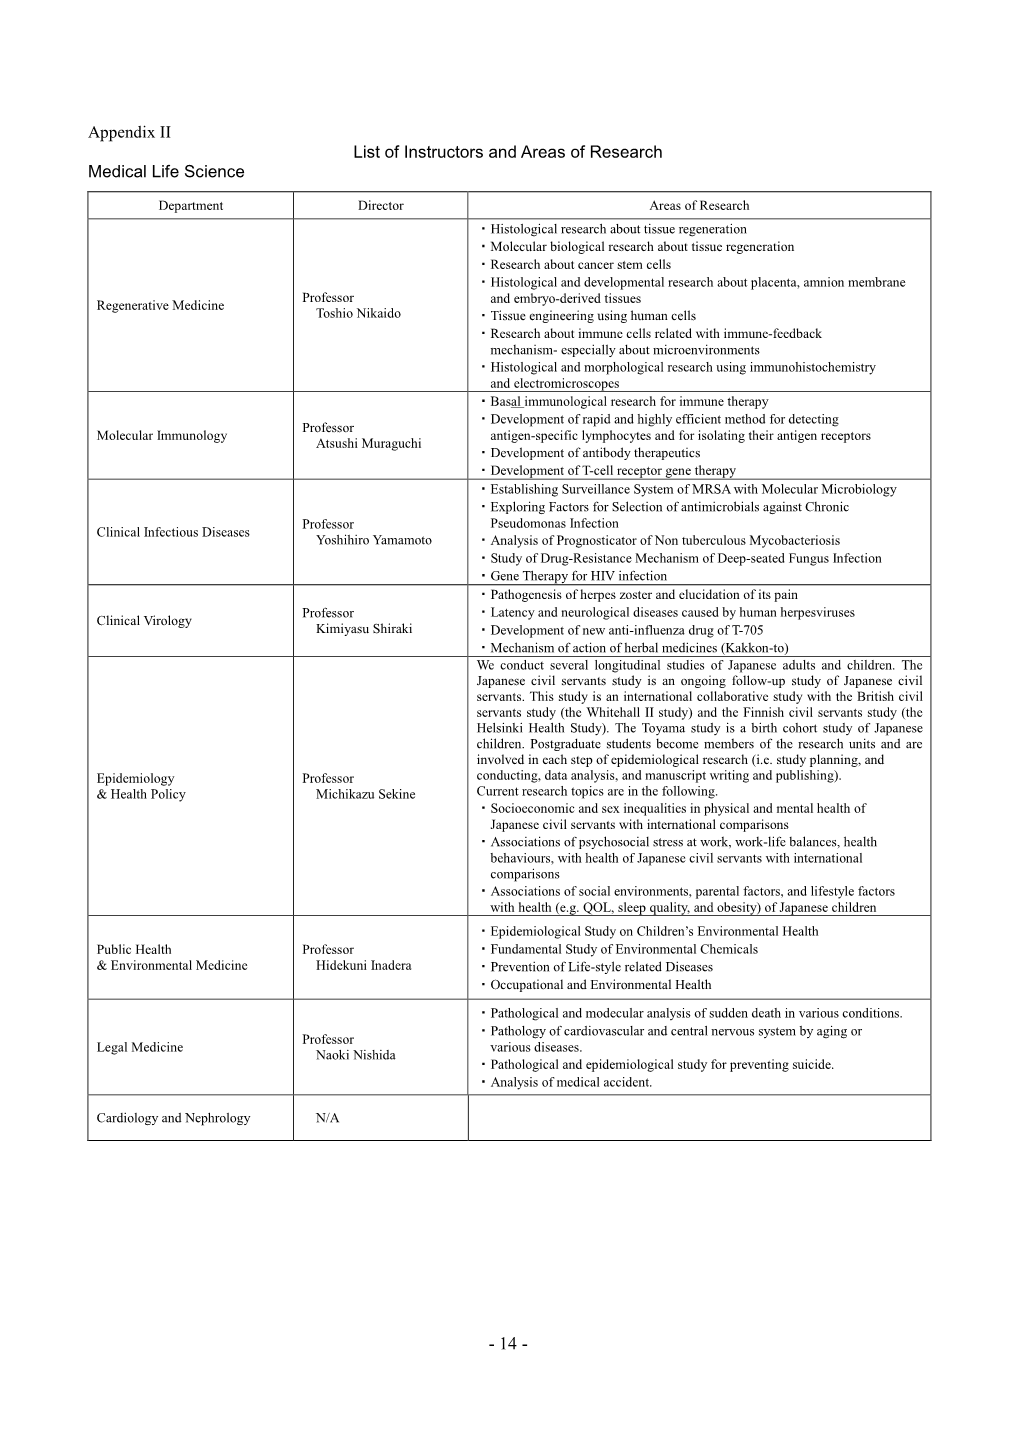 Appendix II List of Instructors and Areas of Research Medical Life Science